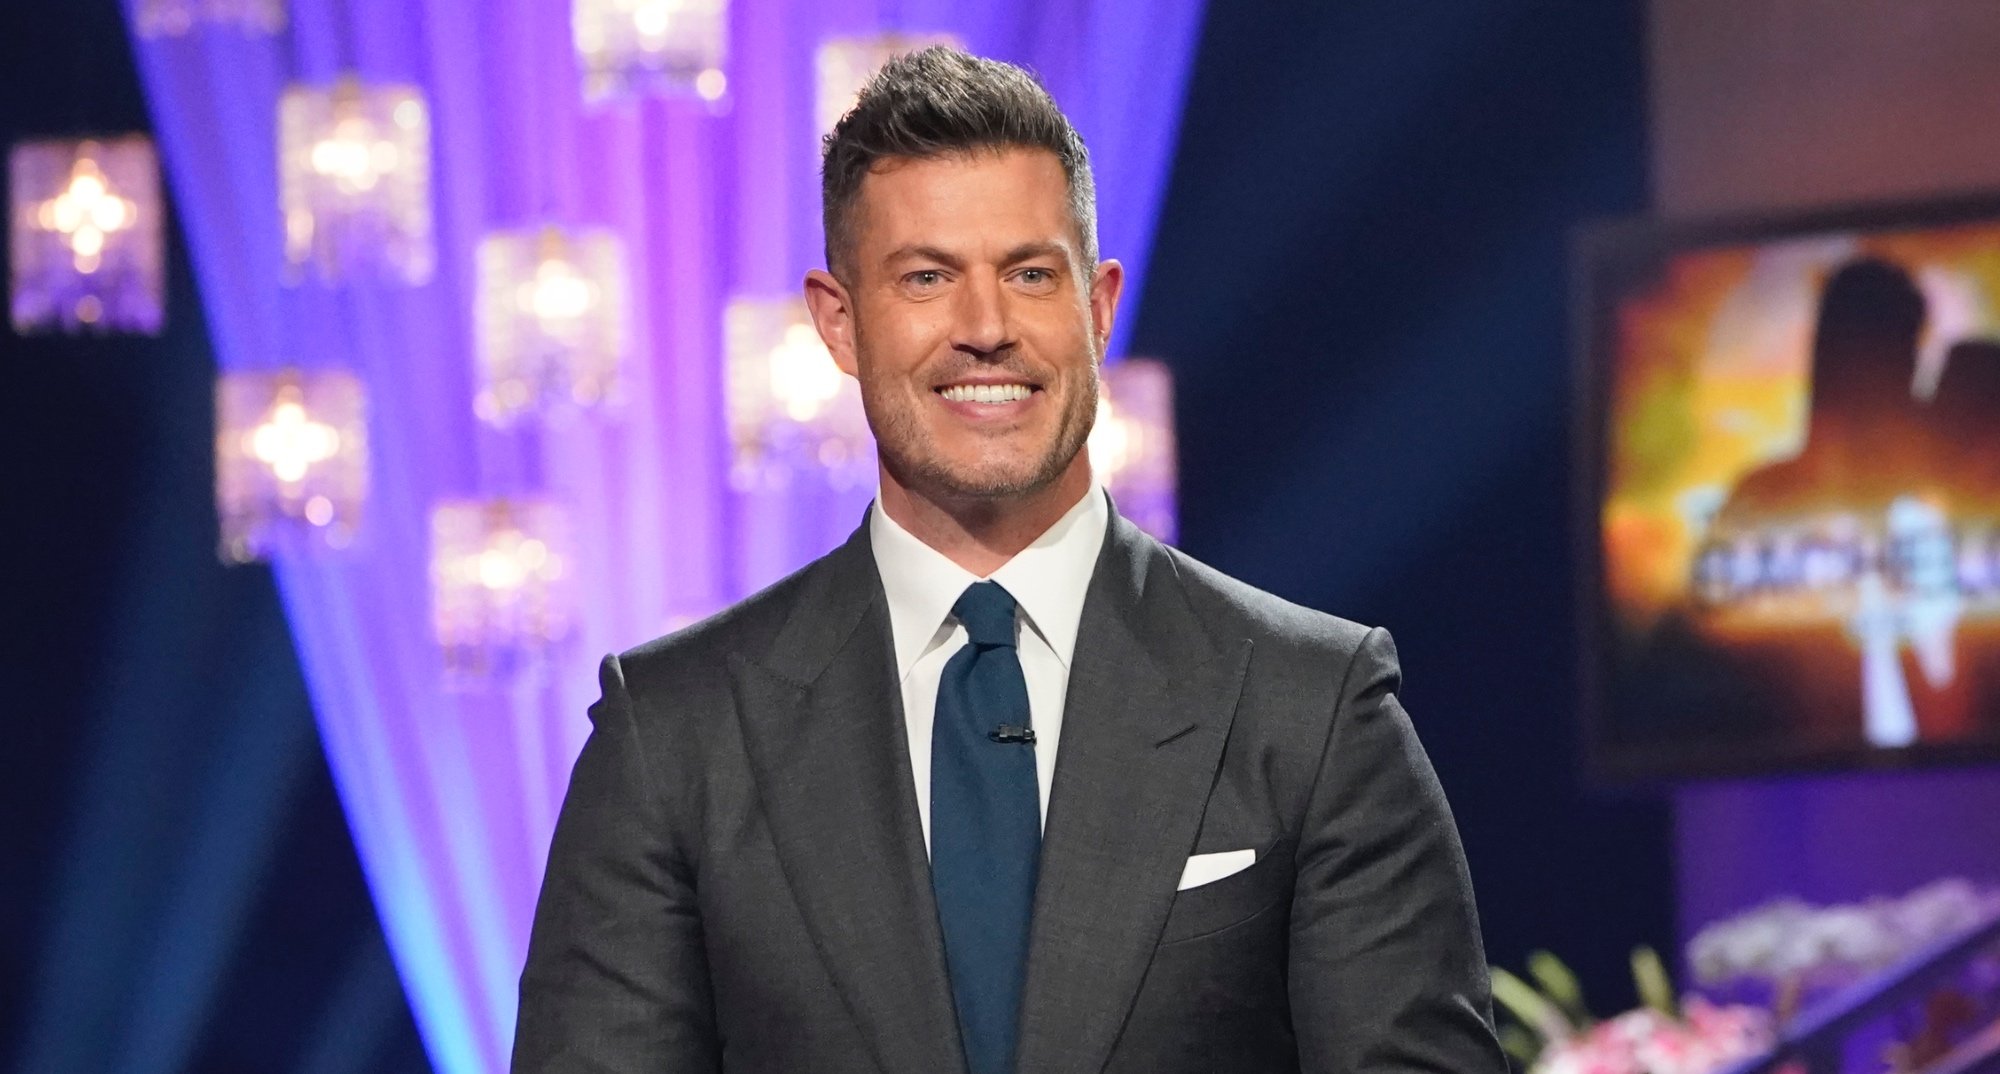 'The Bachelor' host Jesse Palmer wearing grey suit and blue tie.